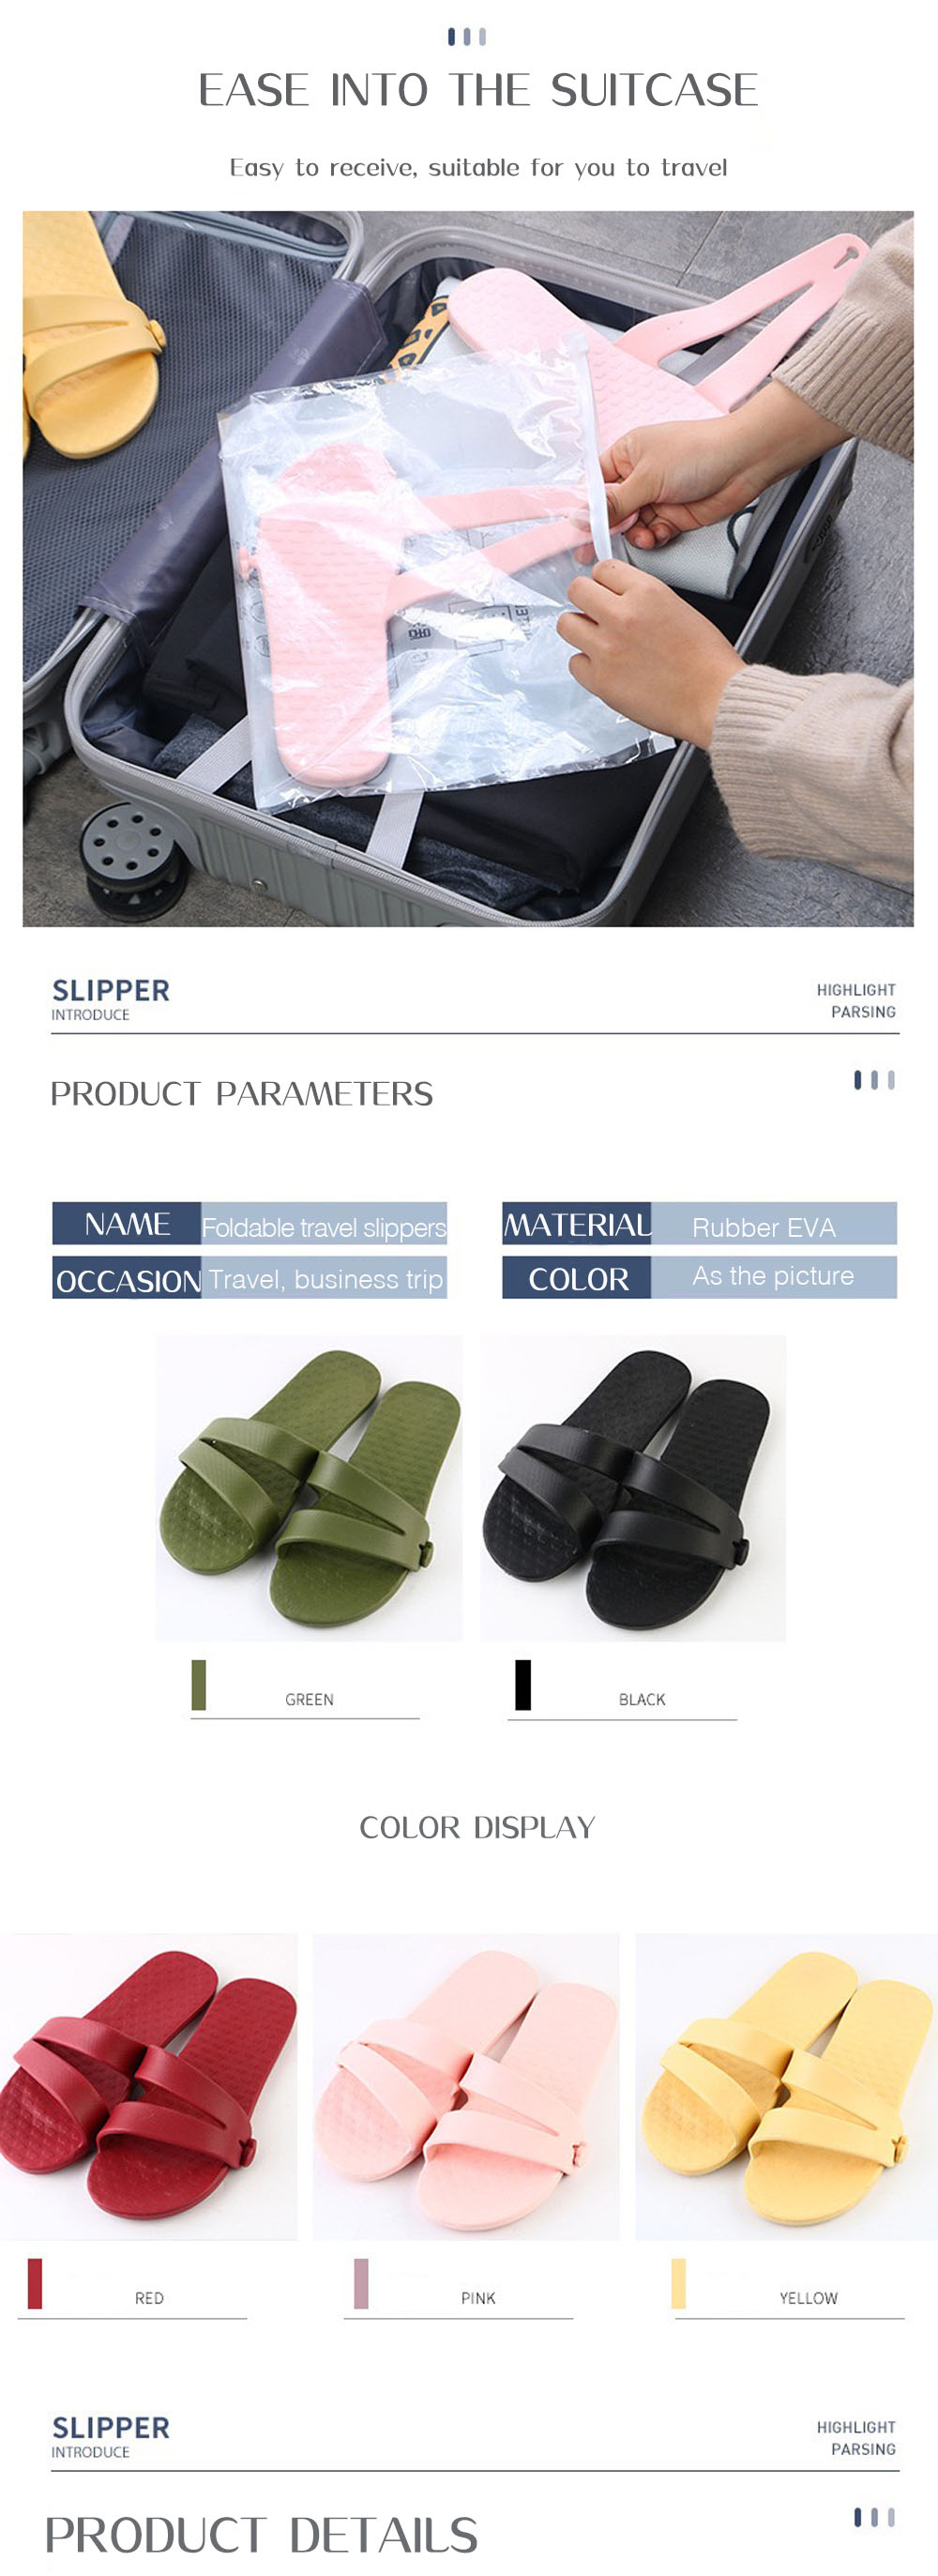 Travel Slippers Specification 2